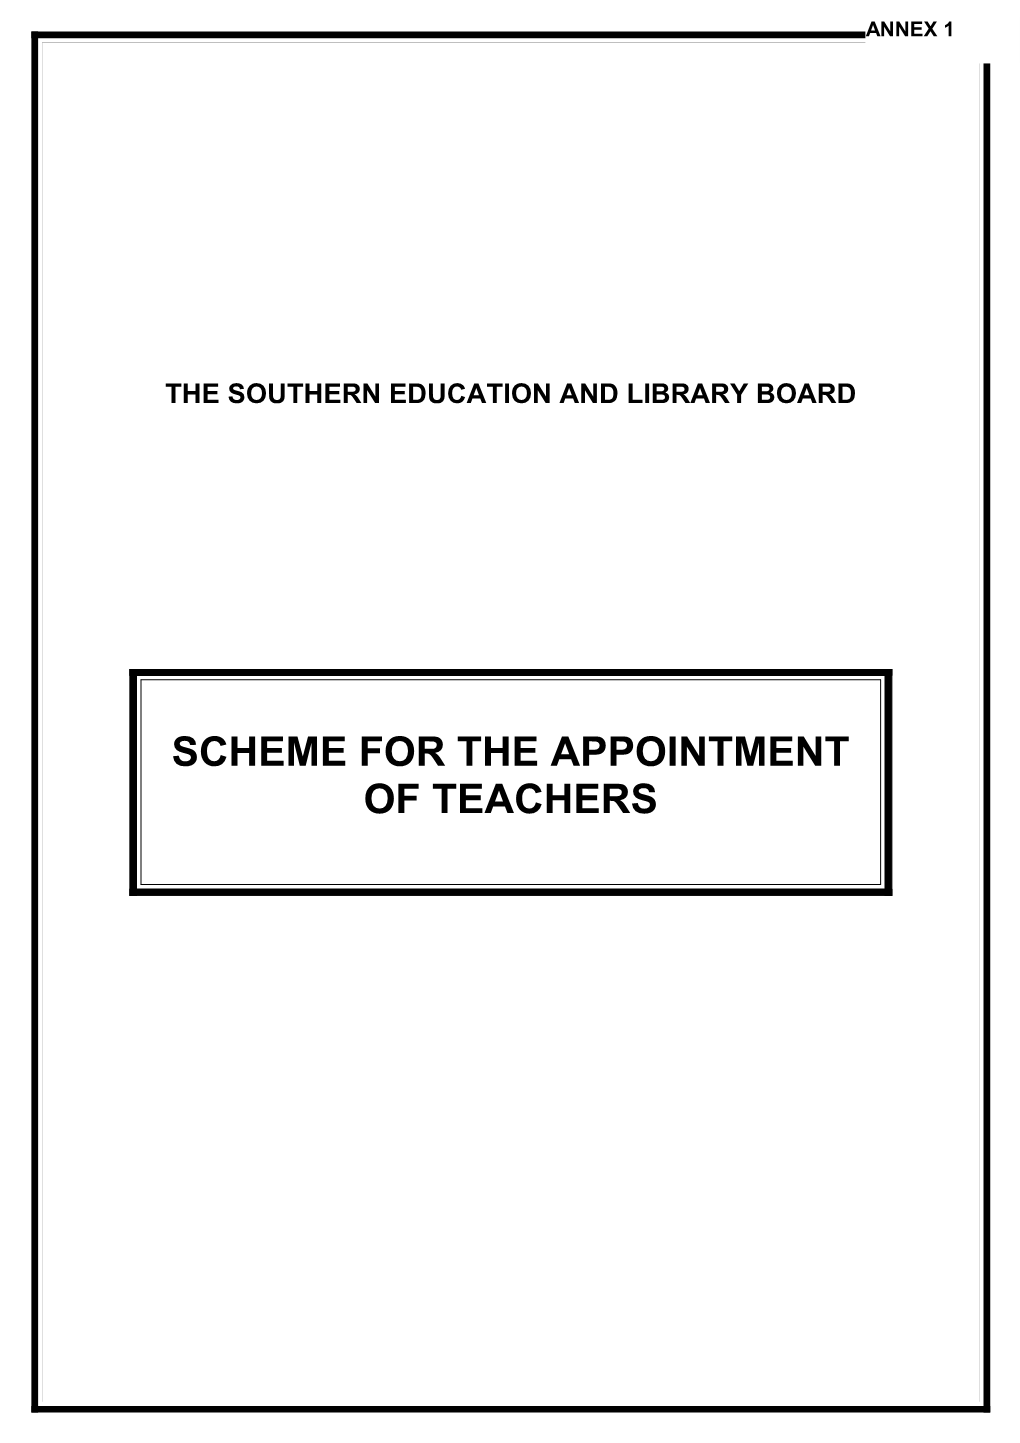 The Southern Education and Library Board